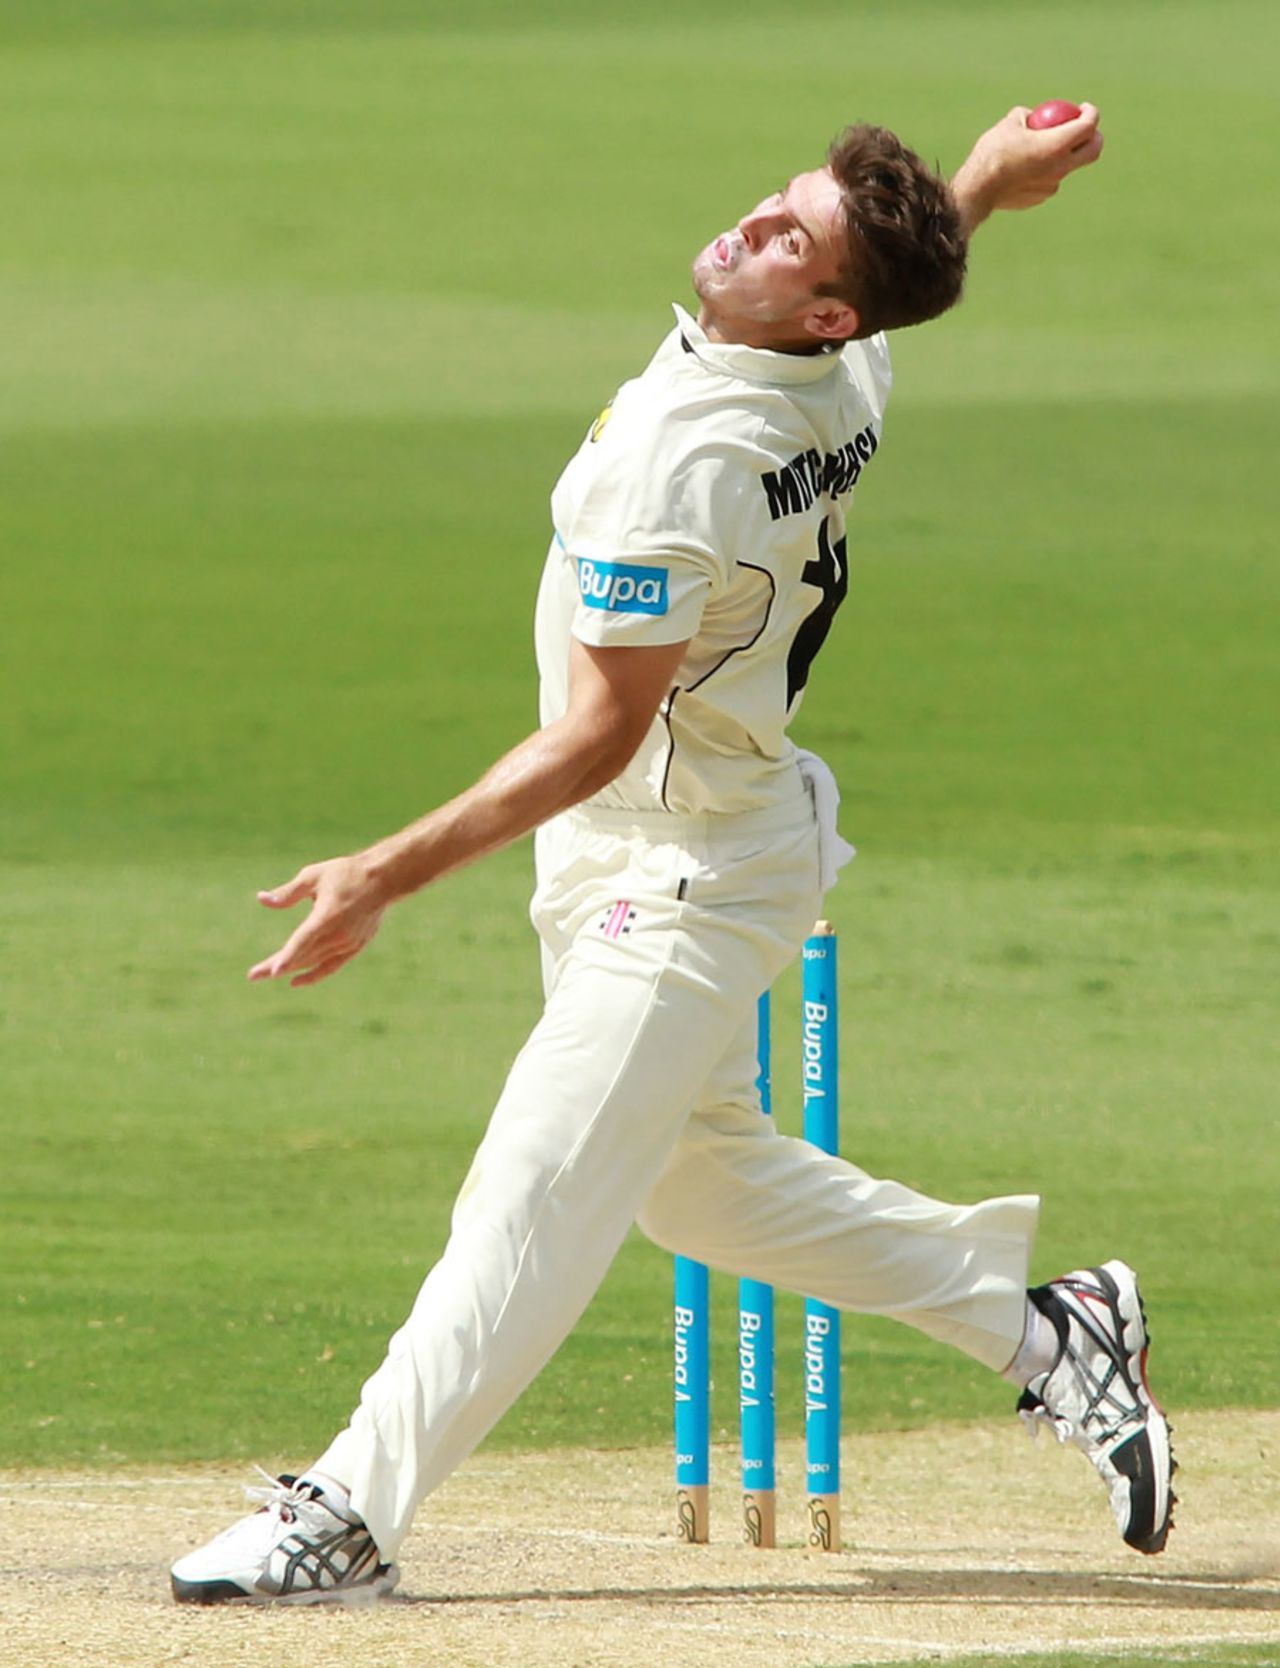 Mitchell Marsh in his delivery stride, South Australia v Western Australia, Sheffield Shield, Adelaide, March 7, 2013